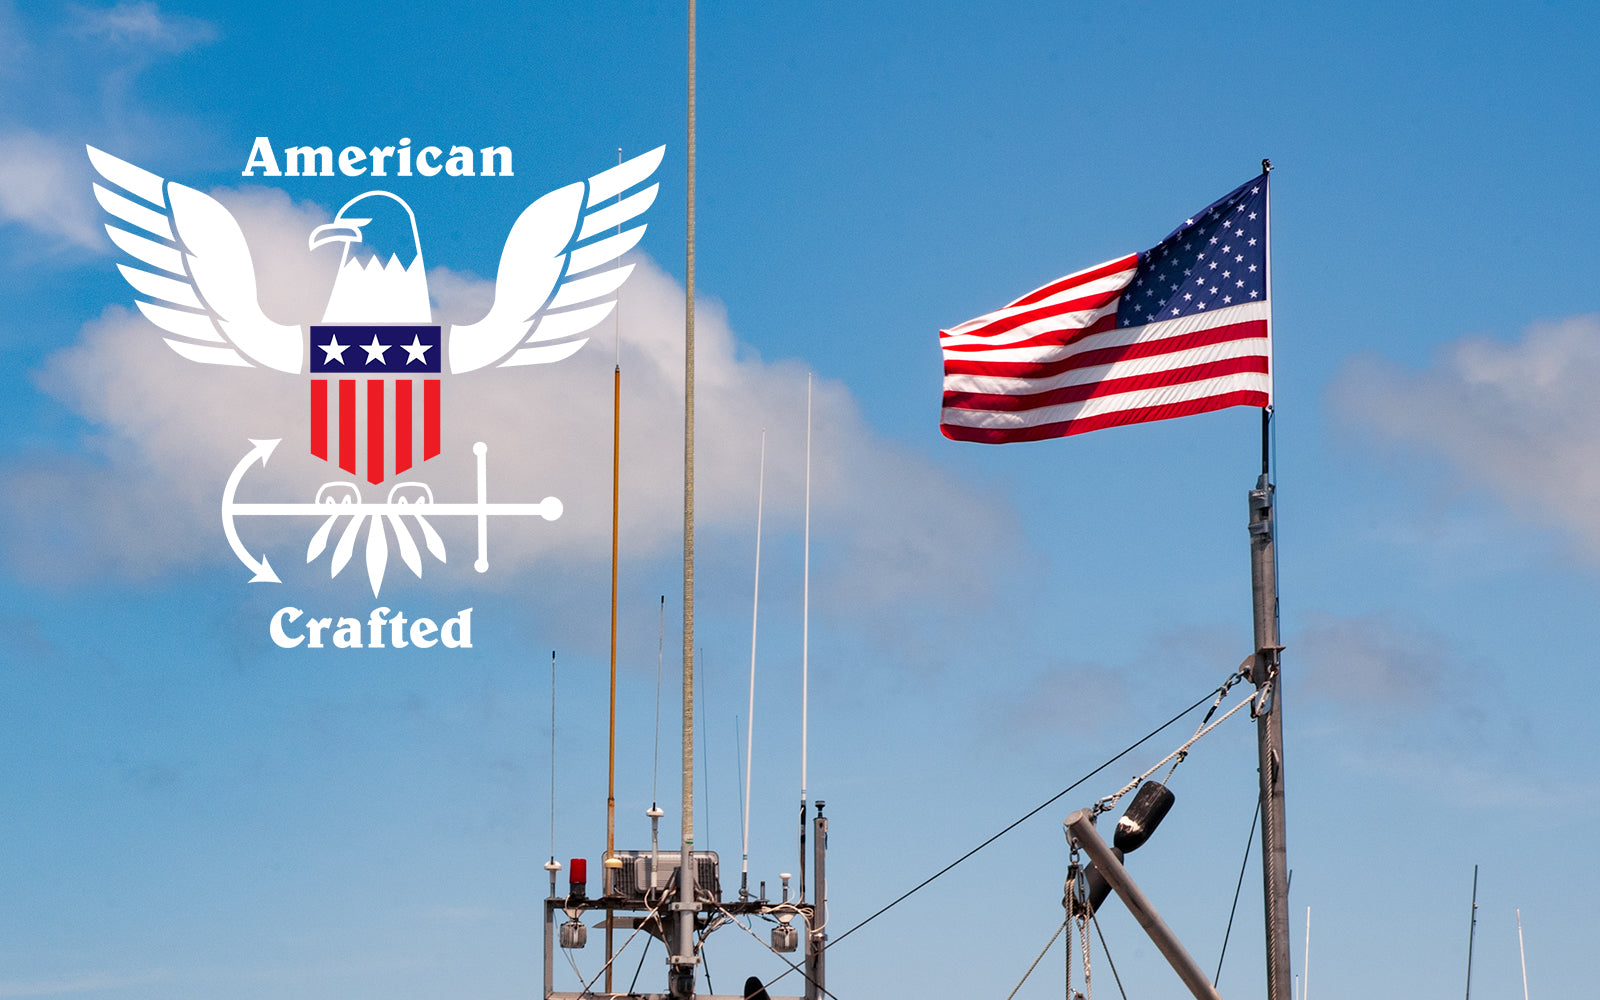 Why Our Saltwater Gear is American Crafted